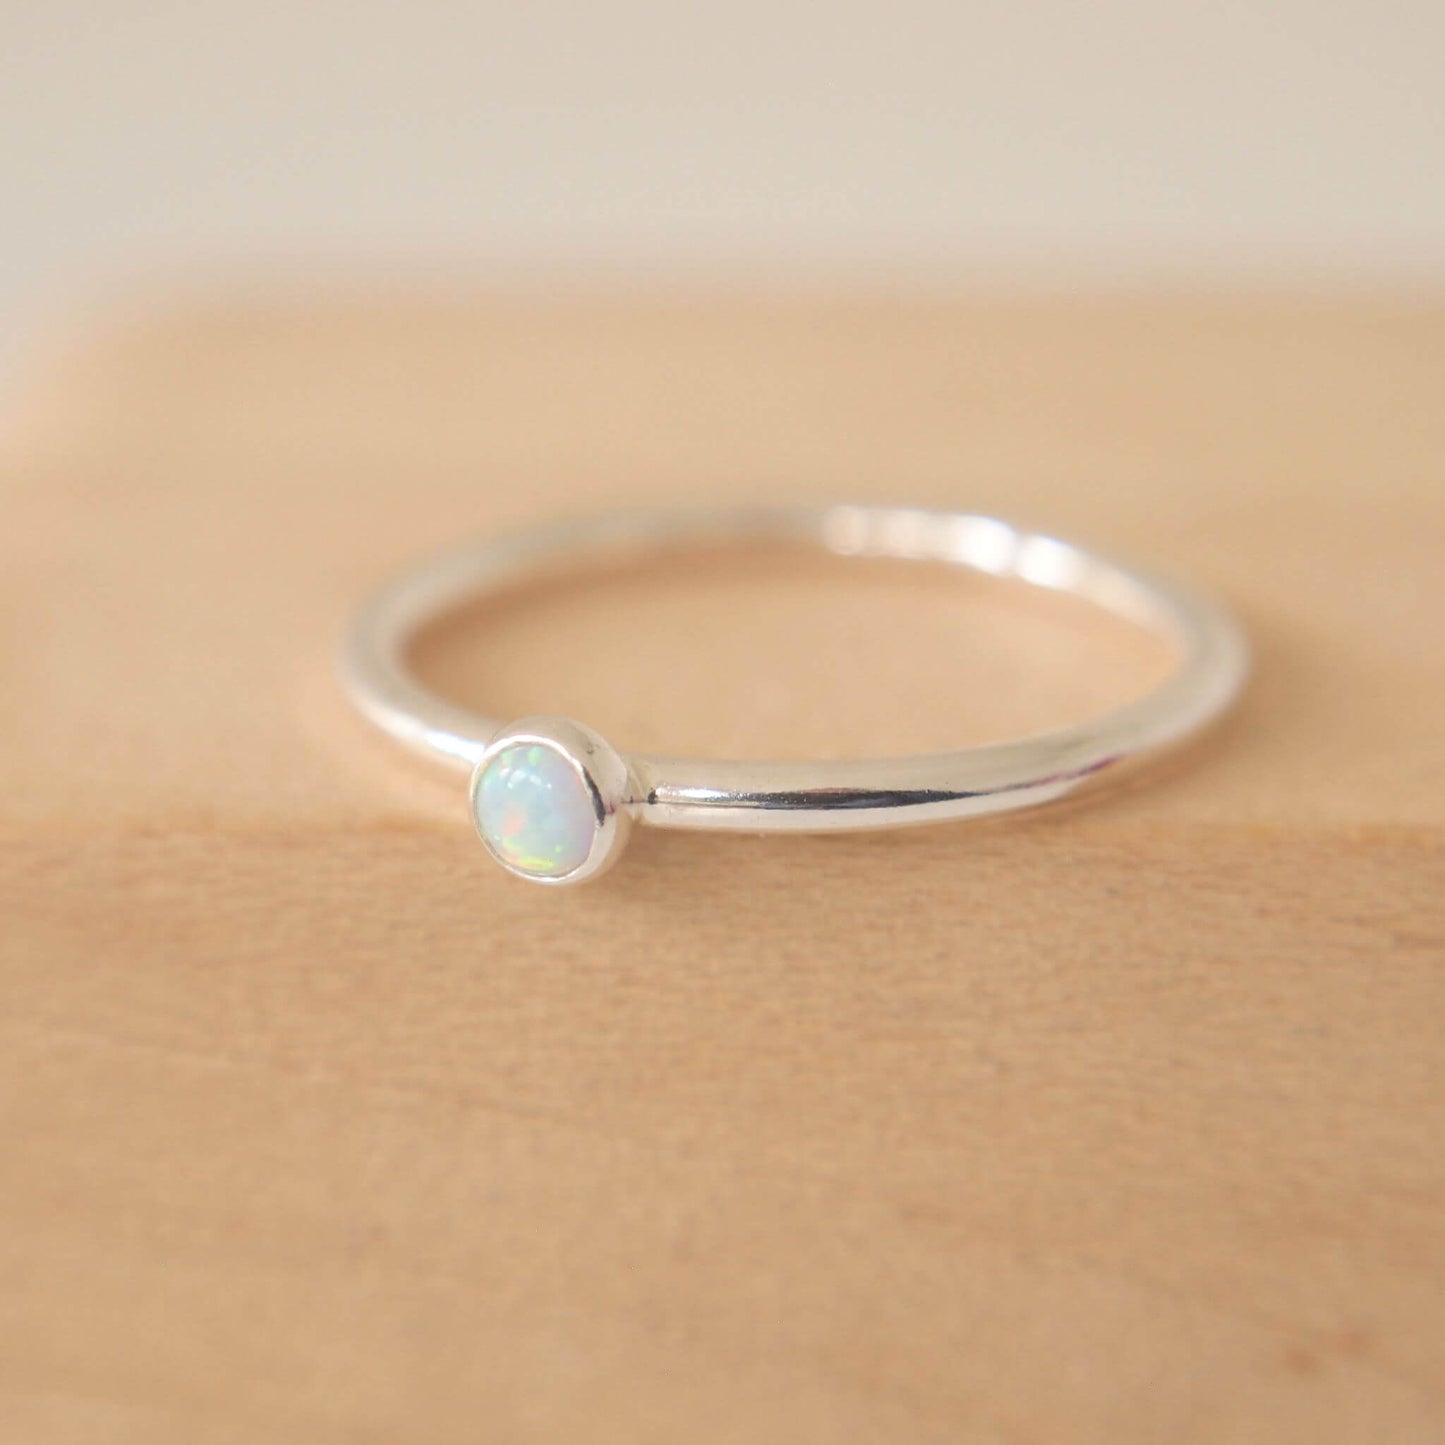 Lab Opal birthstone stacking ring with small gemstone. Hand made in Scotland by maram jewellery